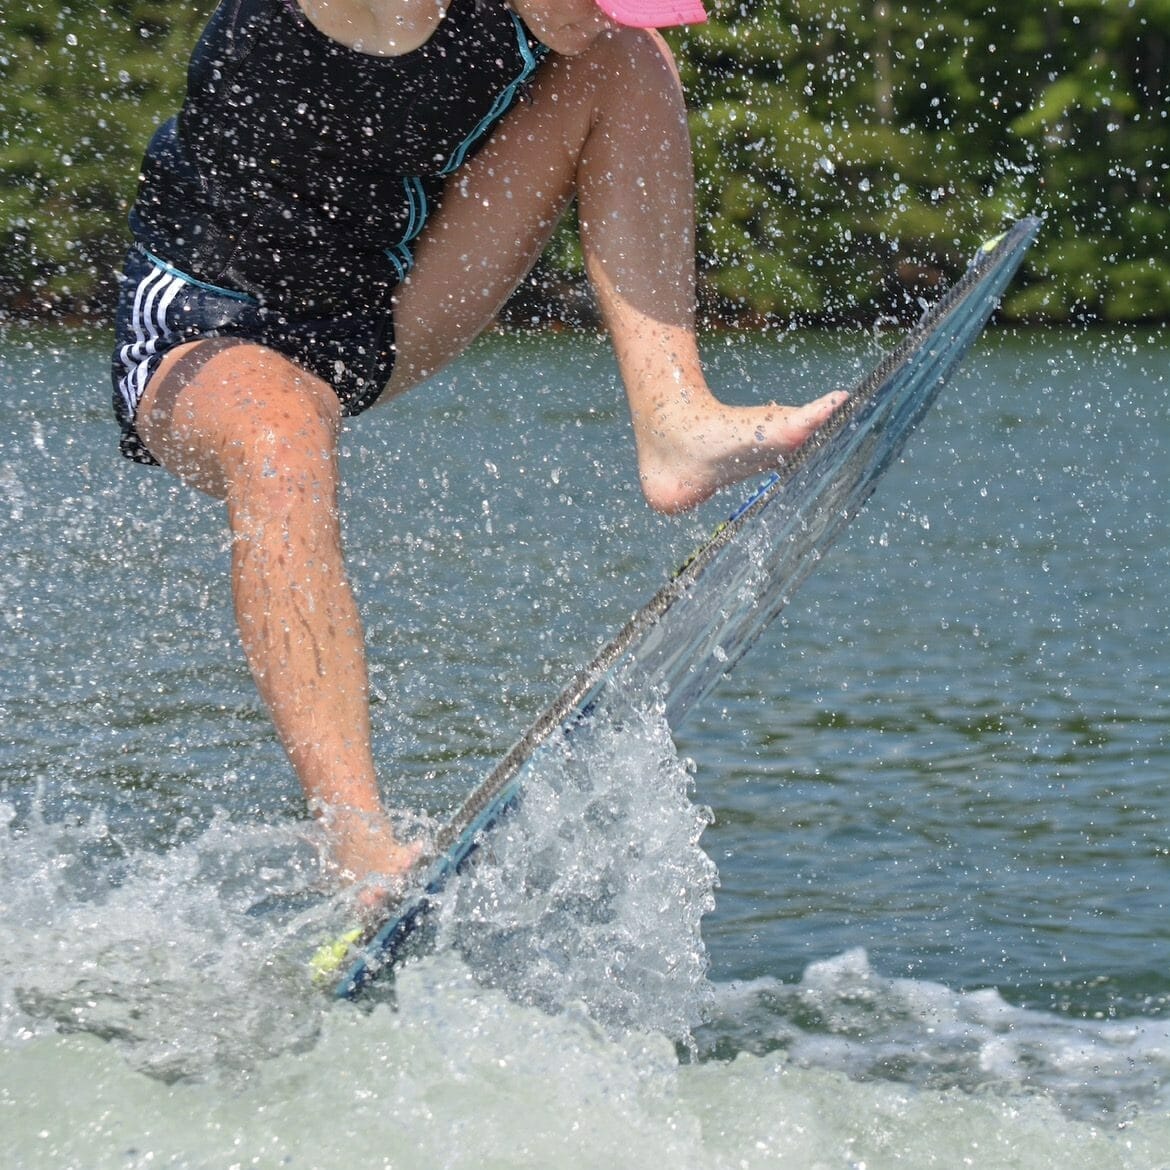 A girl is surfing on a Supreme surfboard.